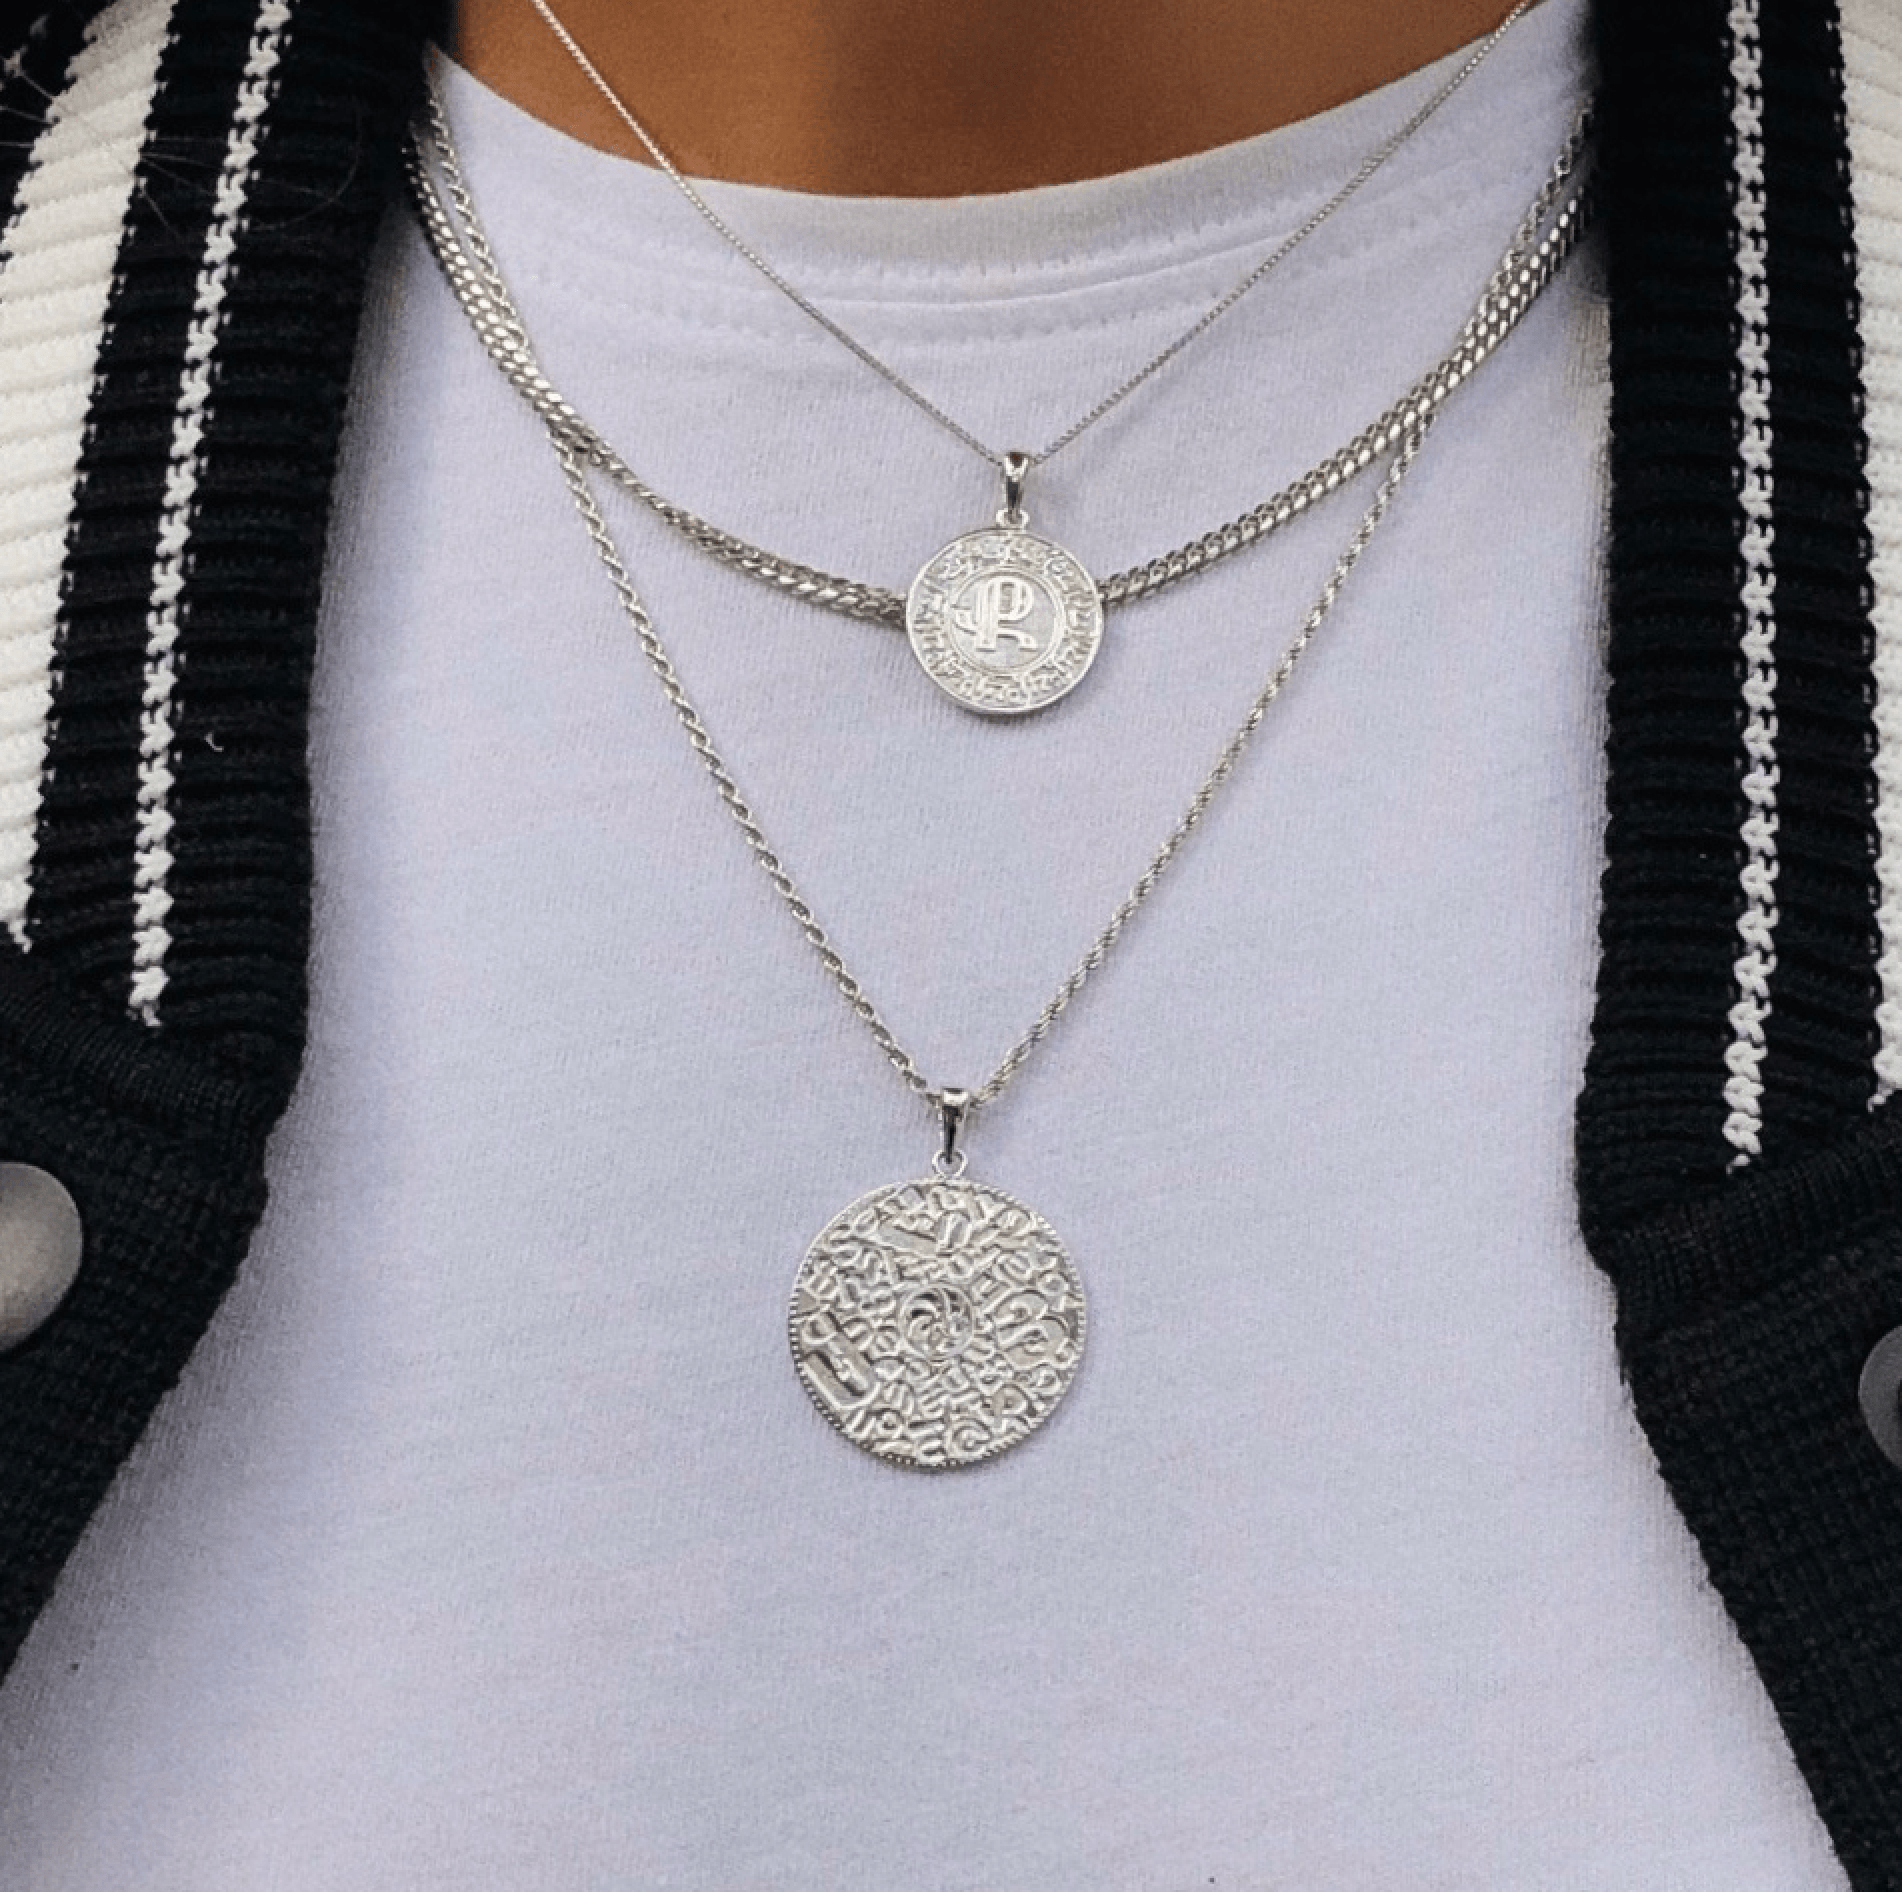 14K White Gold Armenian Initial Coin Pendant Necklaces IceLink-CAL Ա (Ani)  